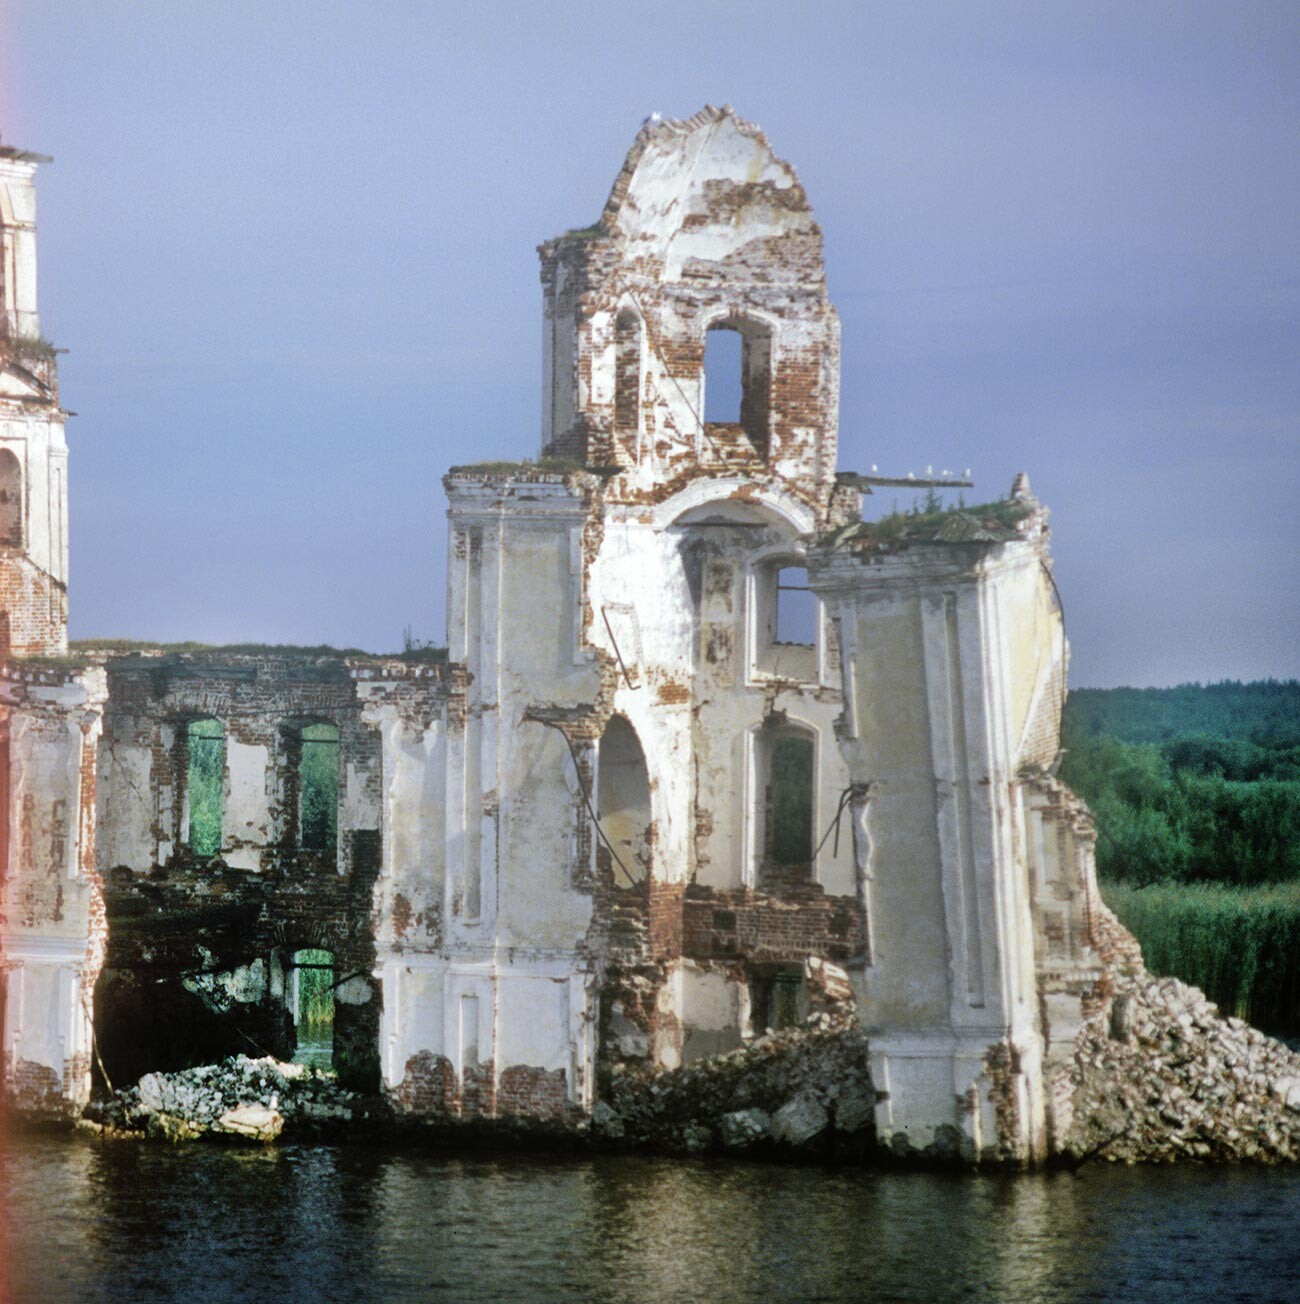 Krokhino. Church of the Nativity. South view with only surviving portions of west and north walls of main structure. Southeast corner on verge of collapse. July 14, 2007